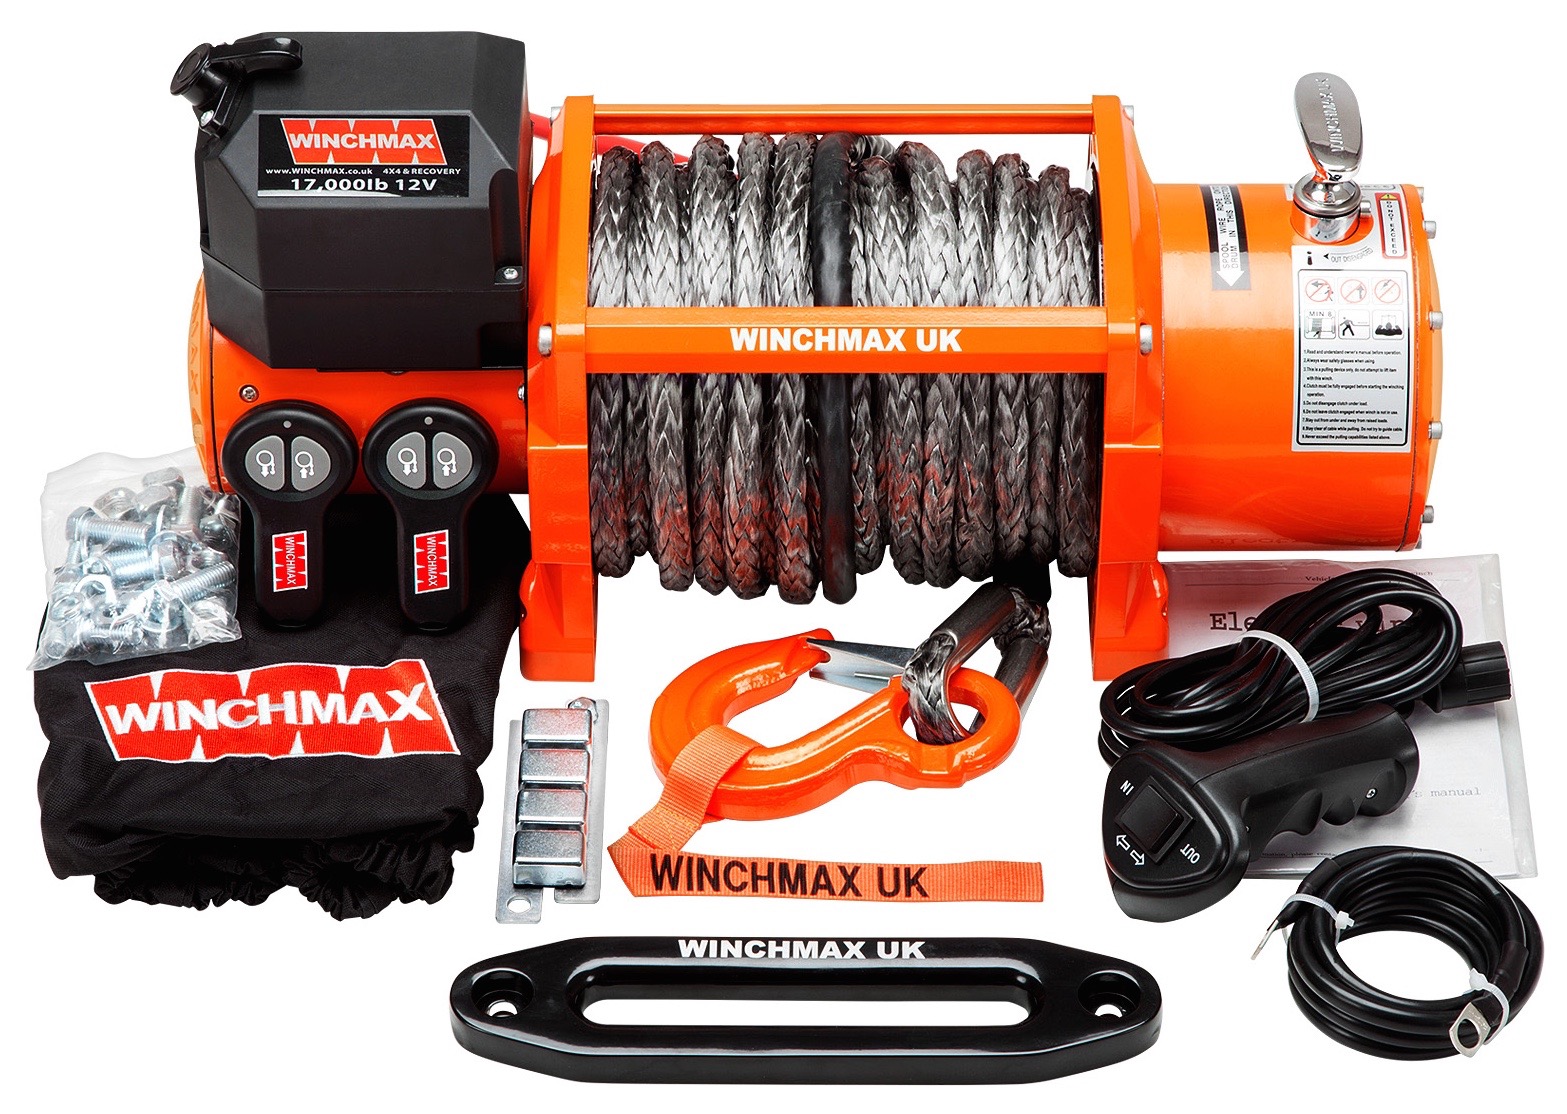 product_view.php?pid=WINCHMAX 17000LB 24V ELECTRIC WINCH DYNEEMA SYNTHETIC ROPE WITH WIRELESS REMOTES